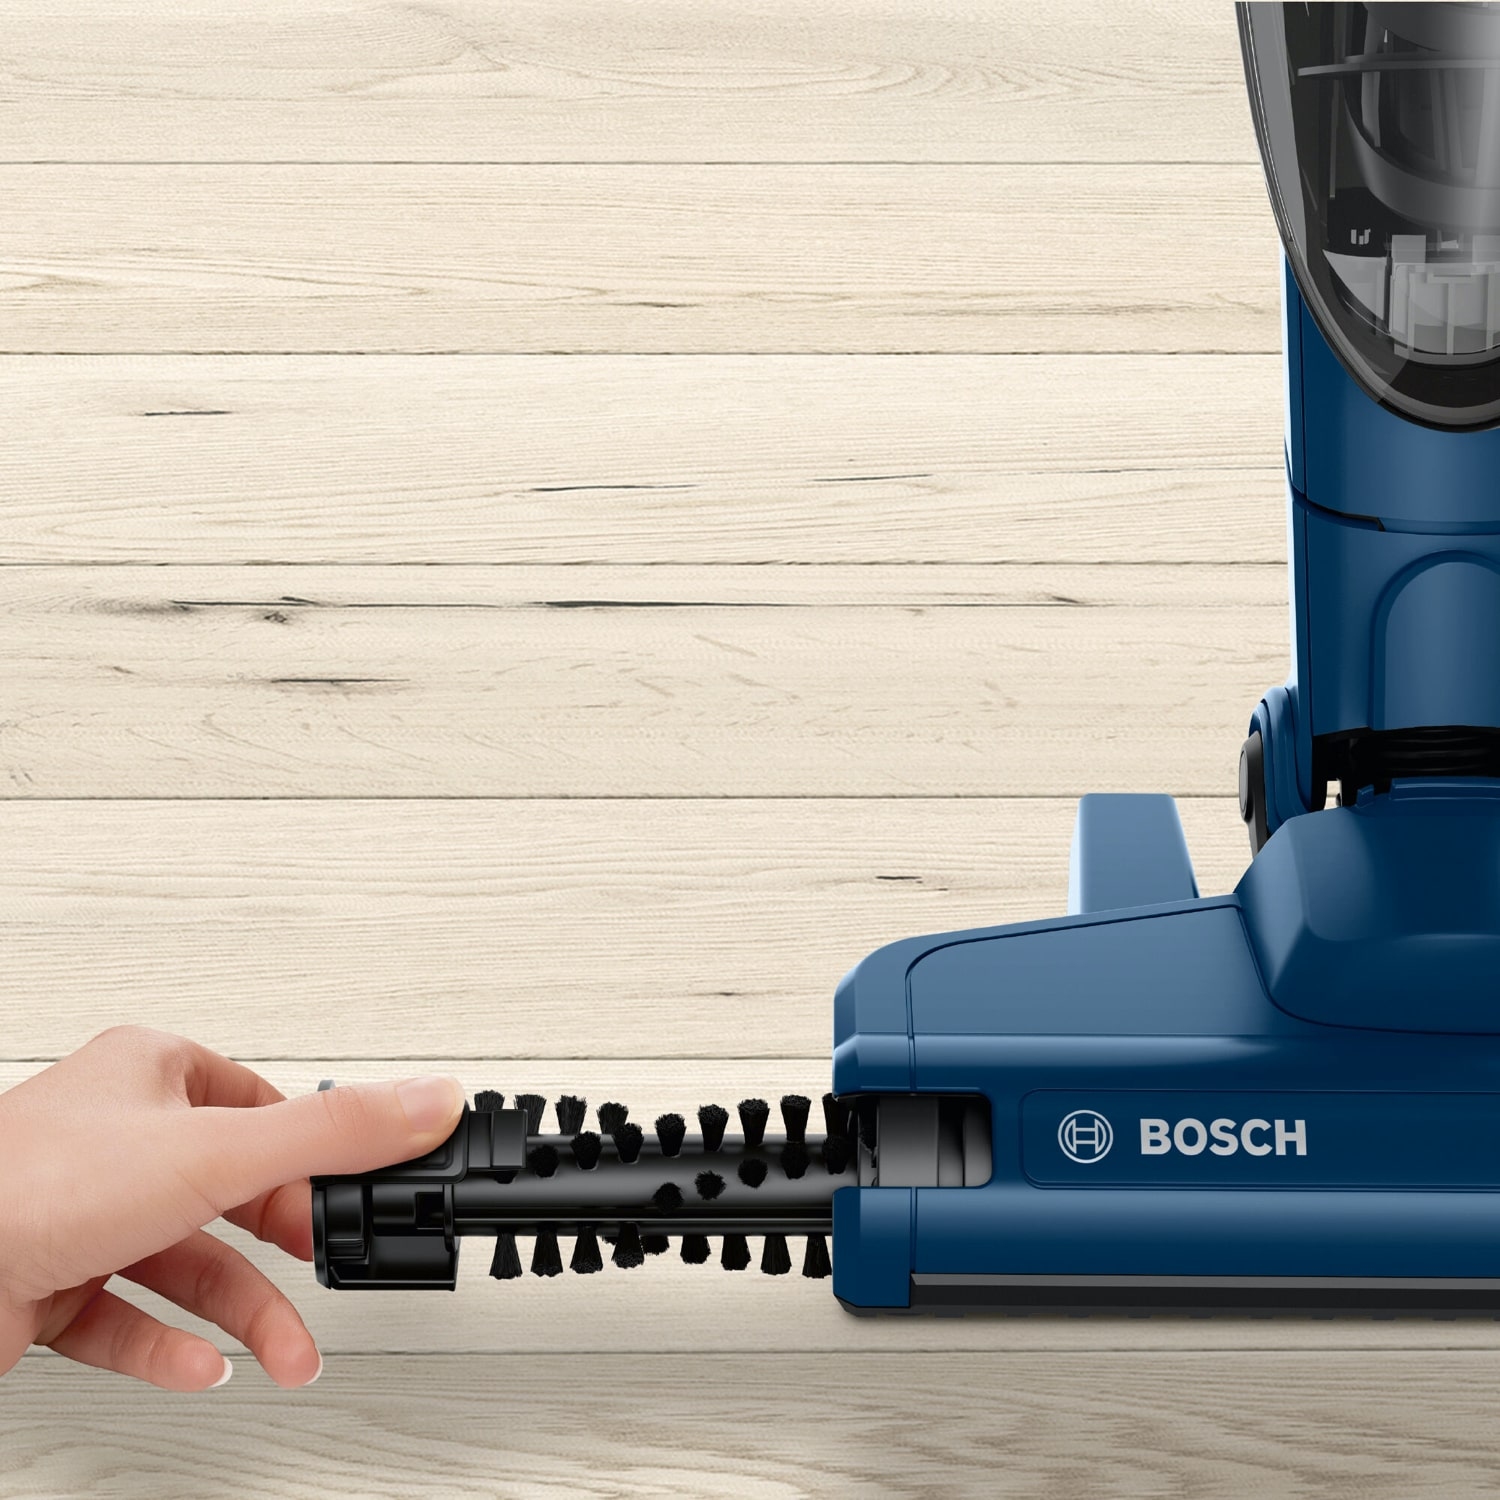 Bosch BCHF216GB Cordless Vacuum Cleaner - 40 Minute Run Time - 6